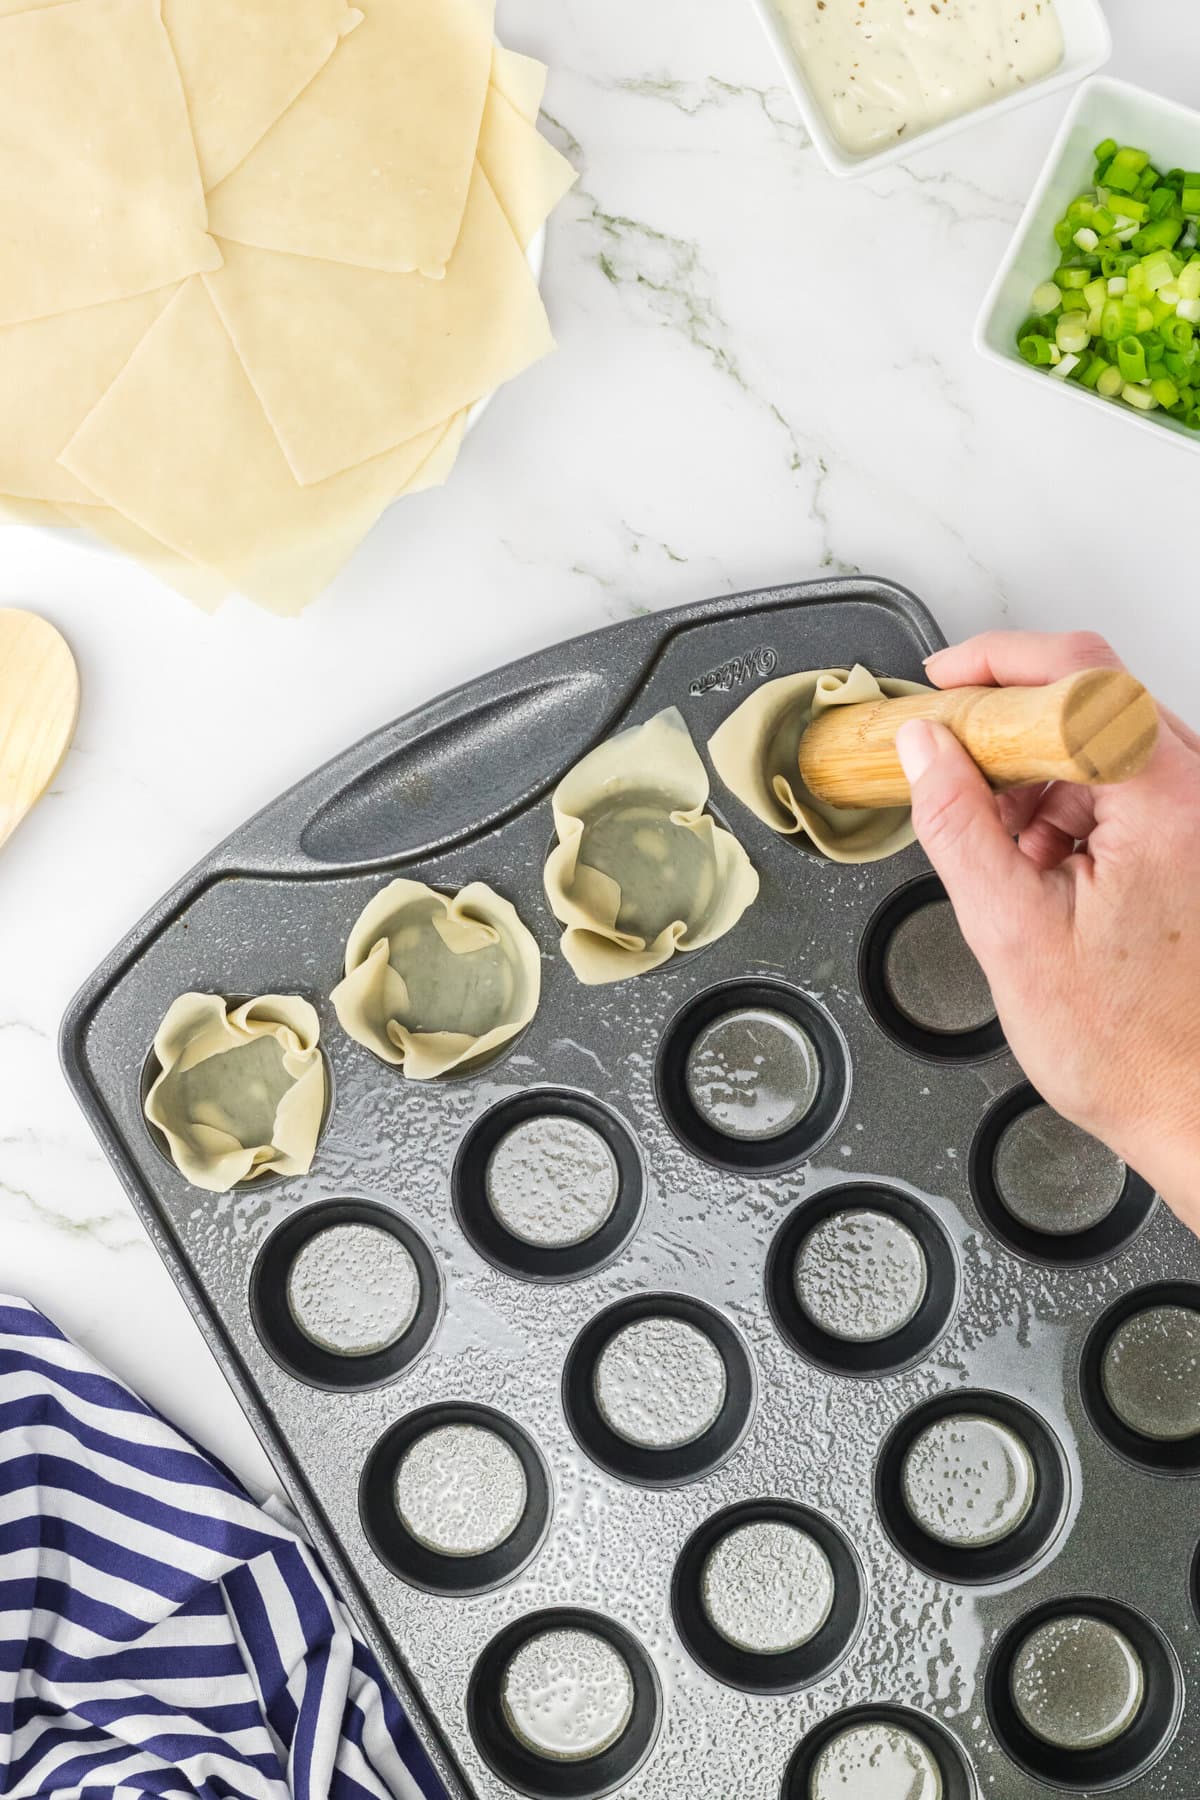 Putting the wrappers in the muffin tin.